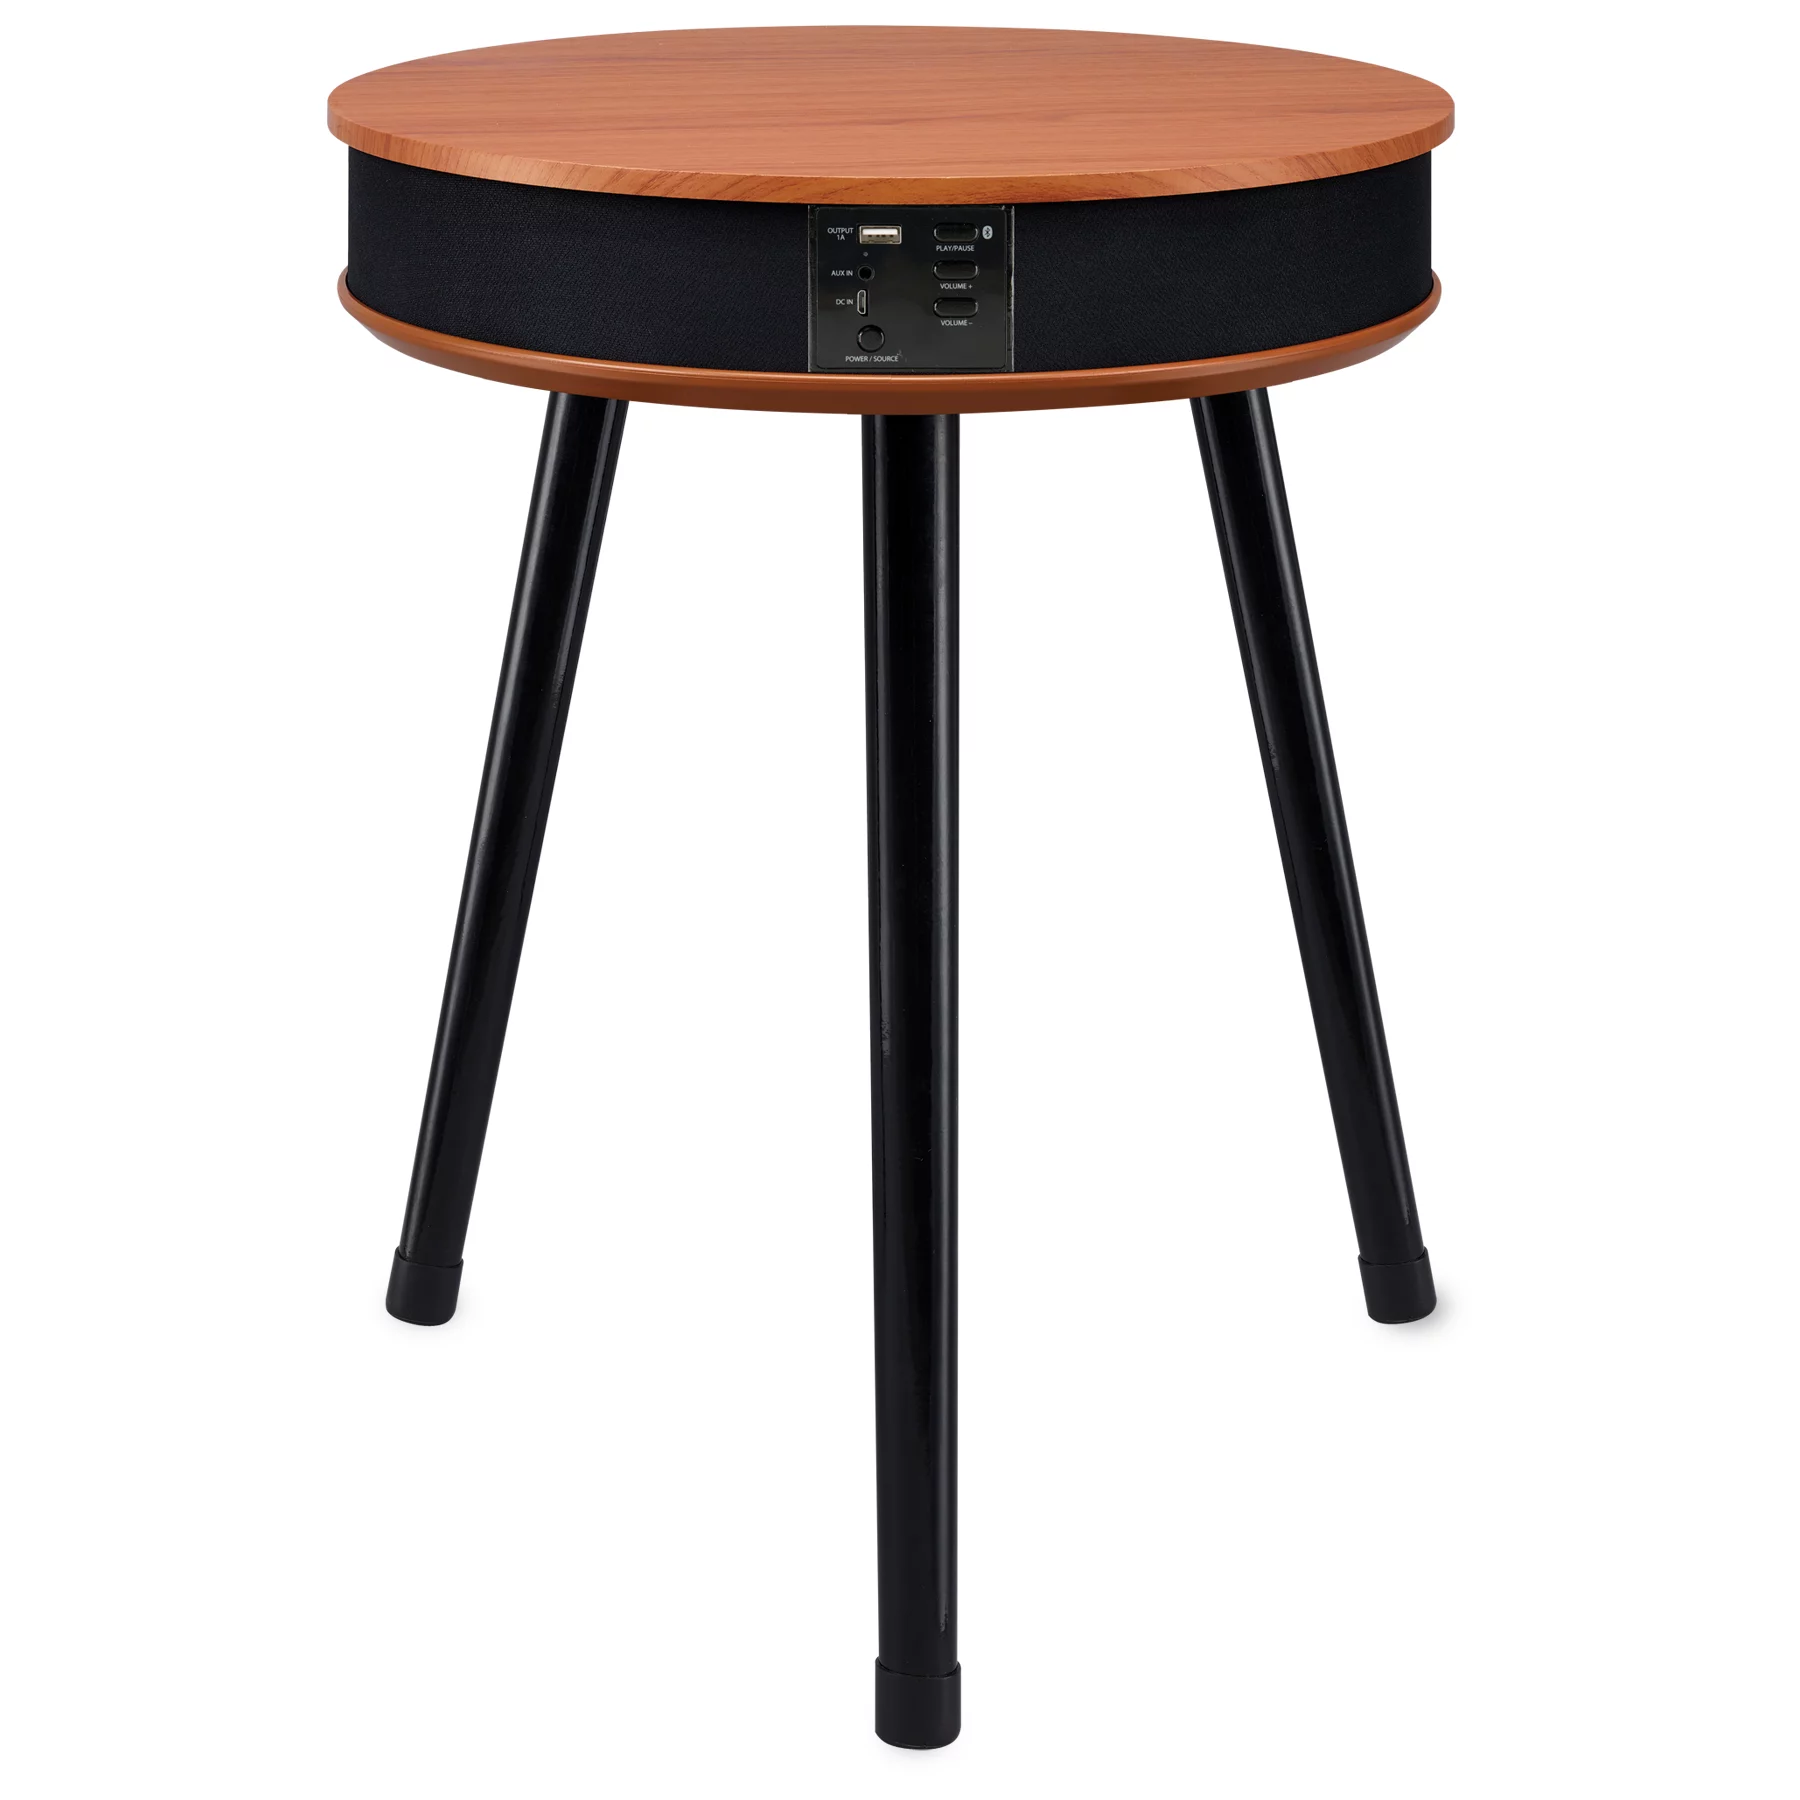 DecorTech Round End Table with Built-In Bluetooth Speaker and USB Charging Port, Multiple Colors